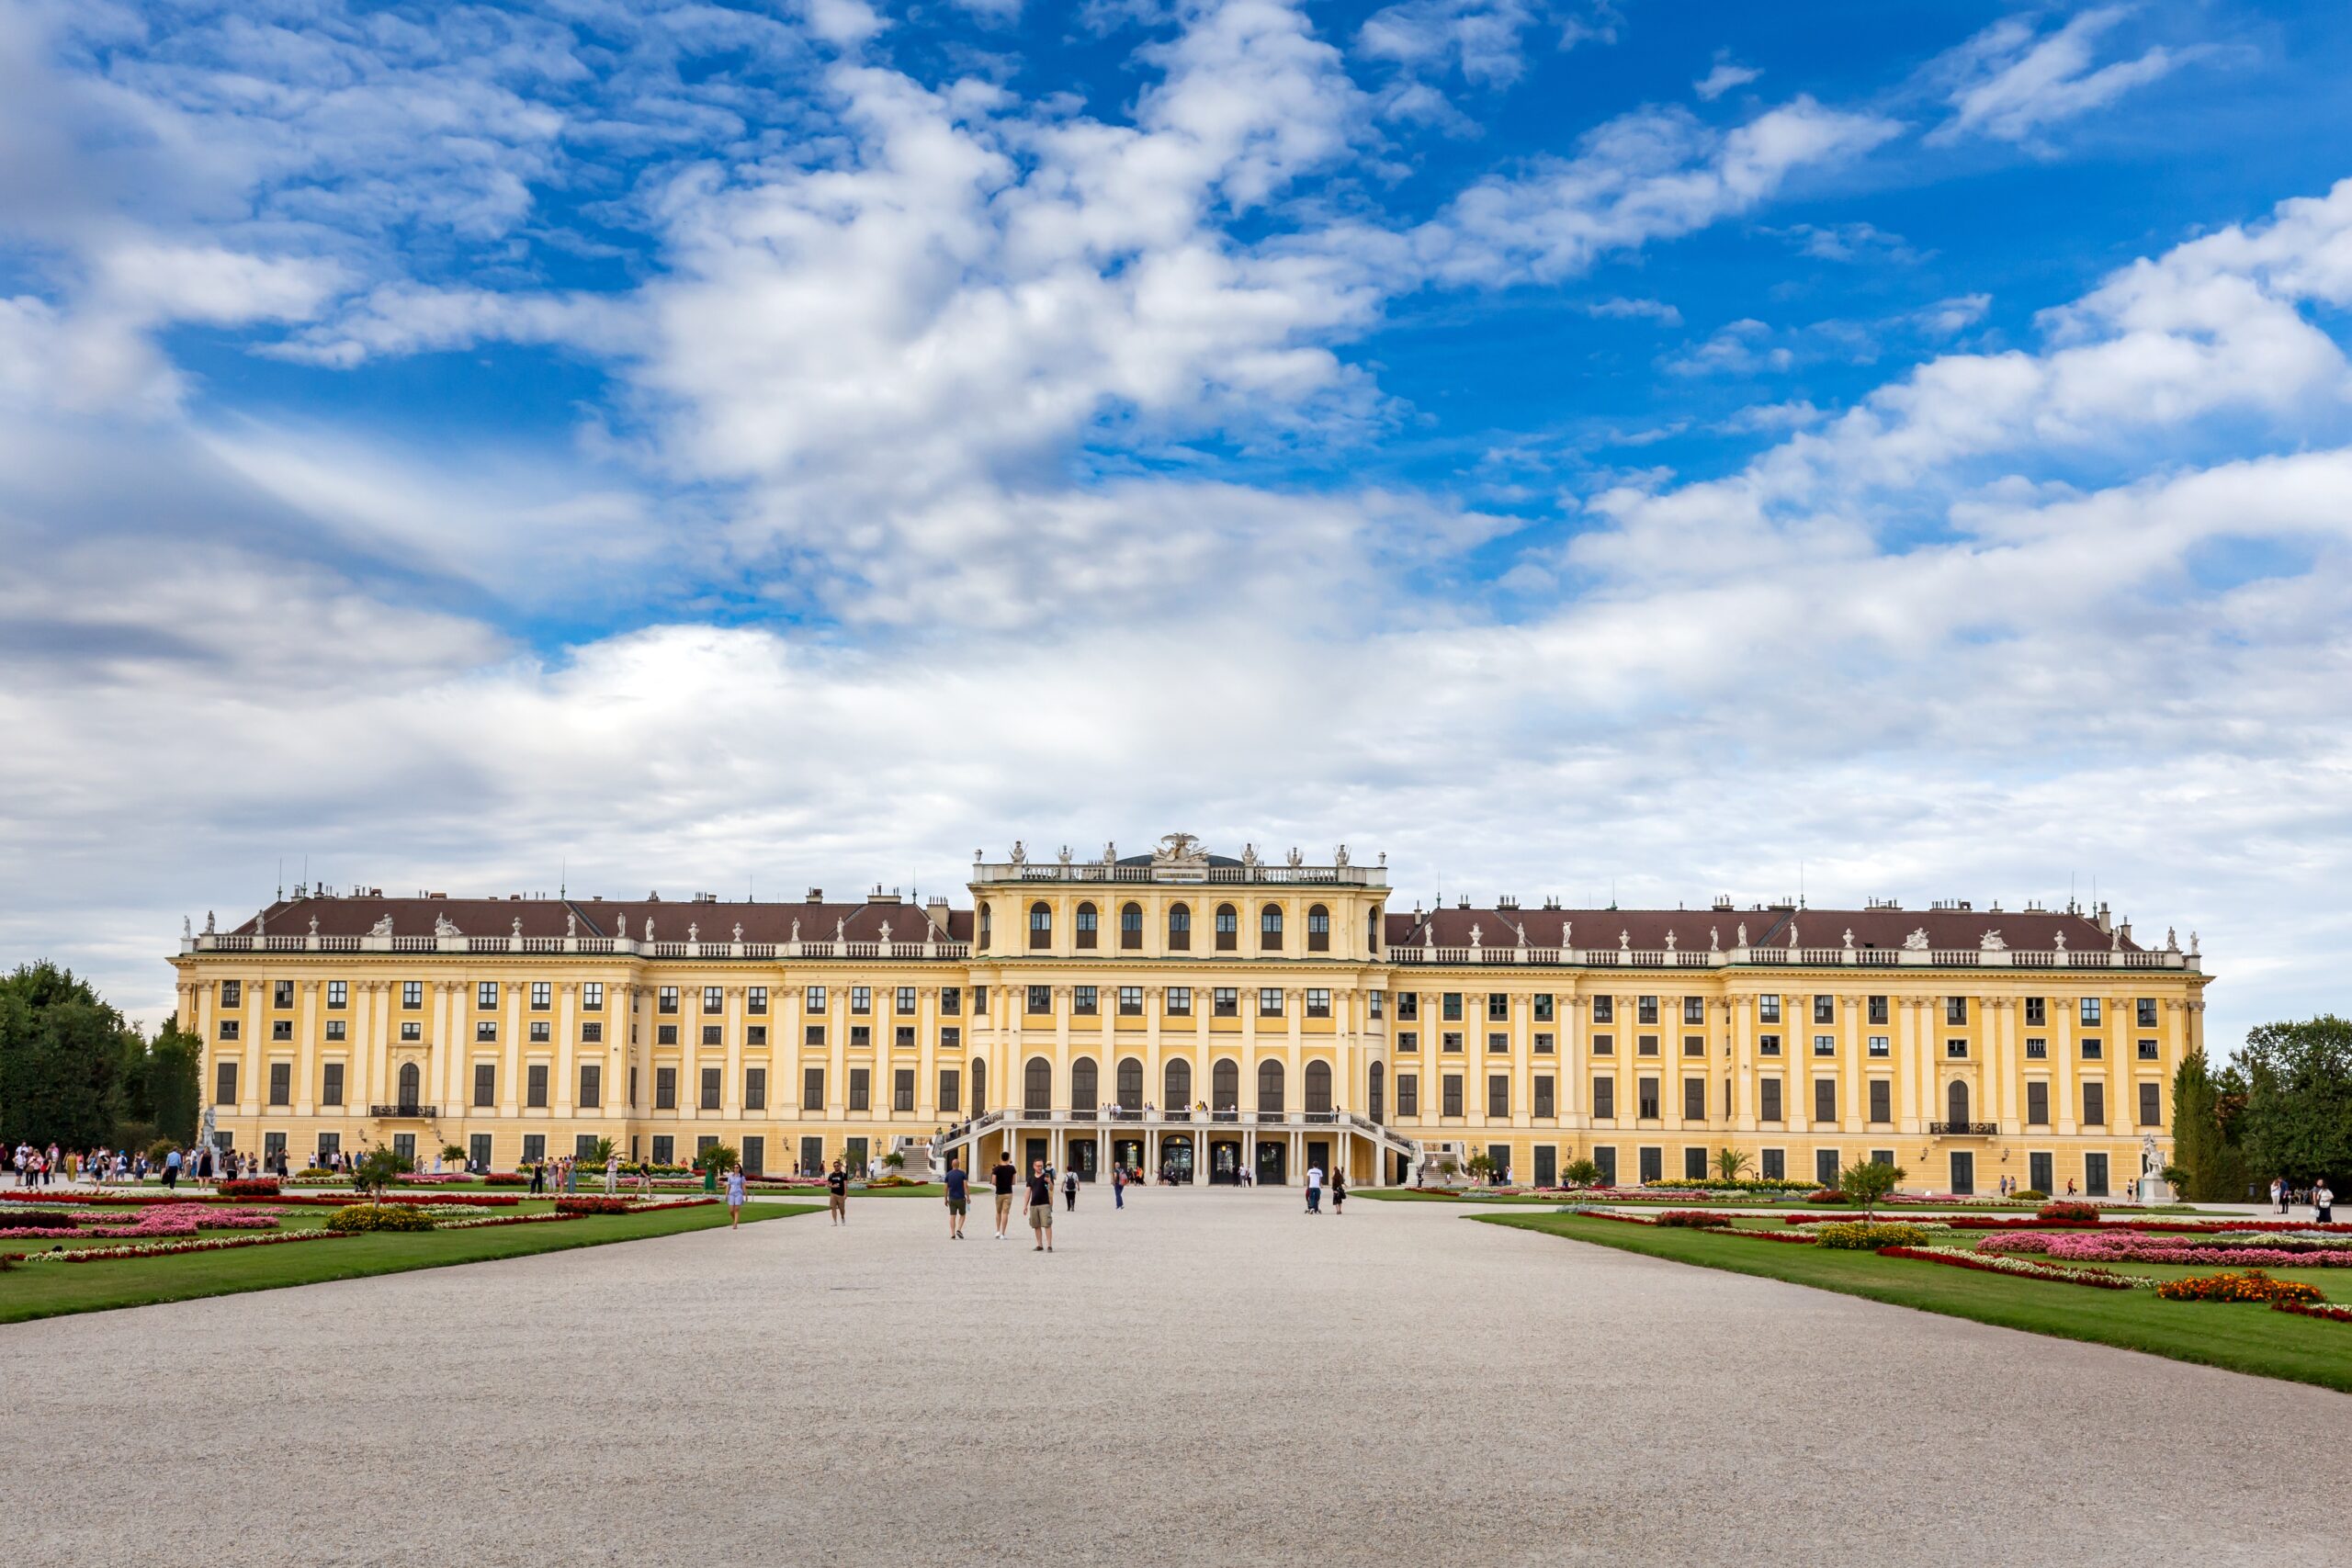 A wide-angle shot of schönbrunn palace in vienna, austria with a cloudy blue sky in the background